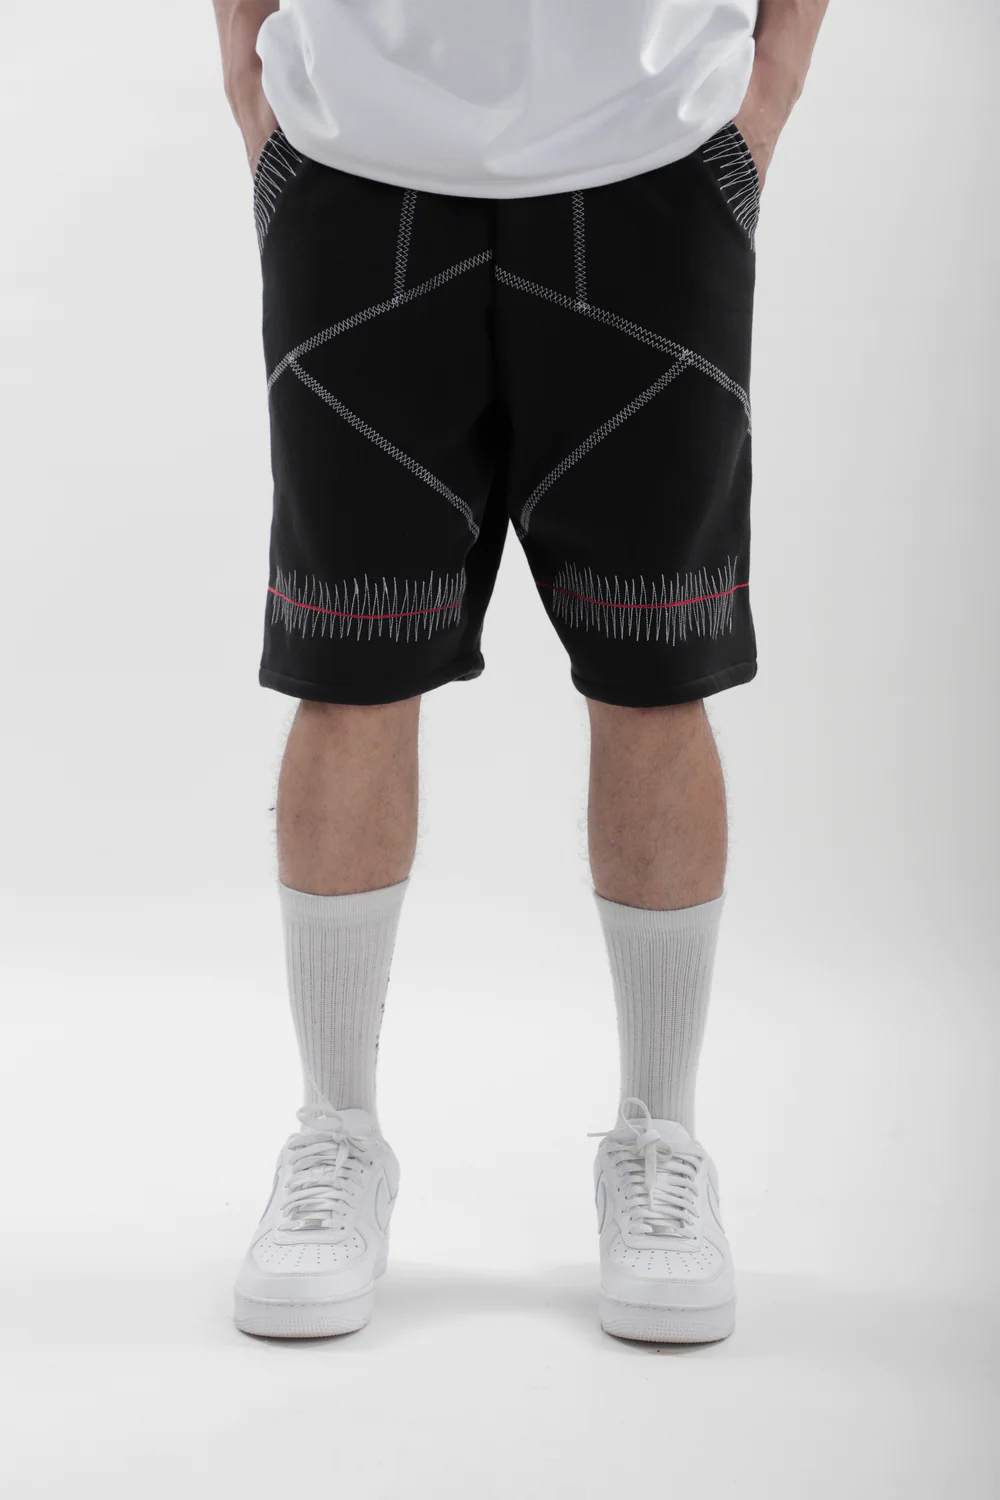 Punk Shorts, a product by TOFFLE